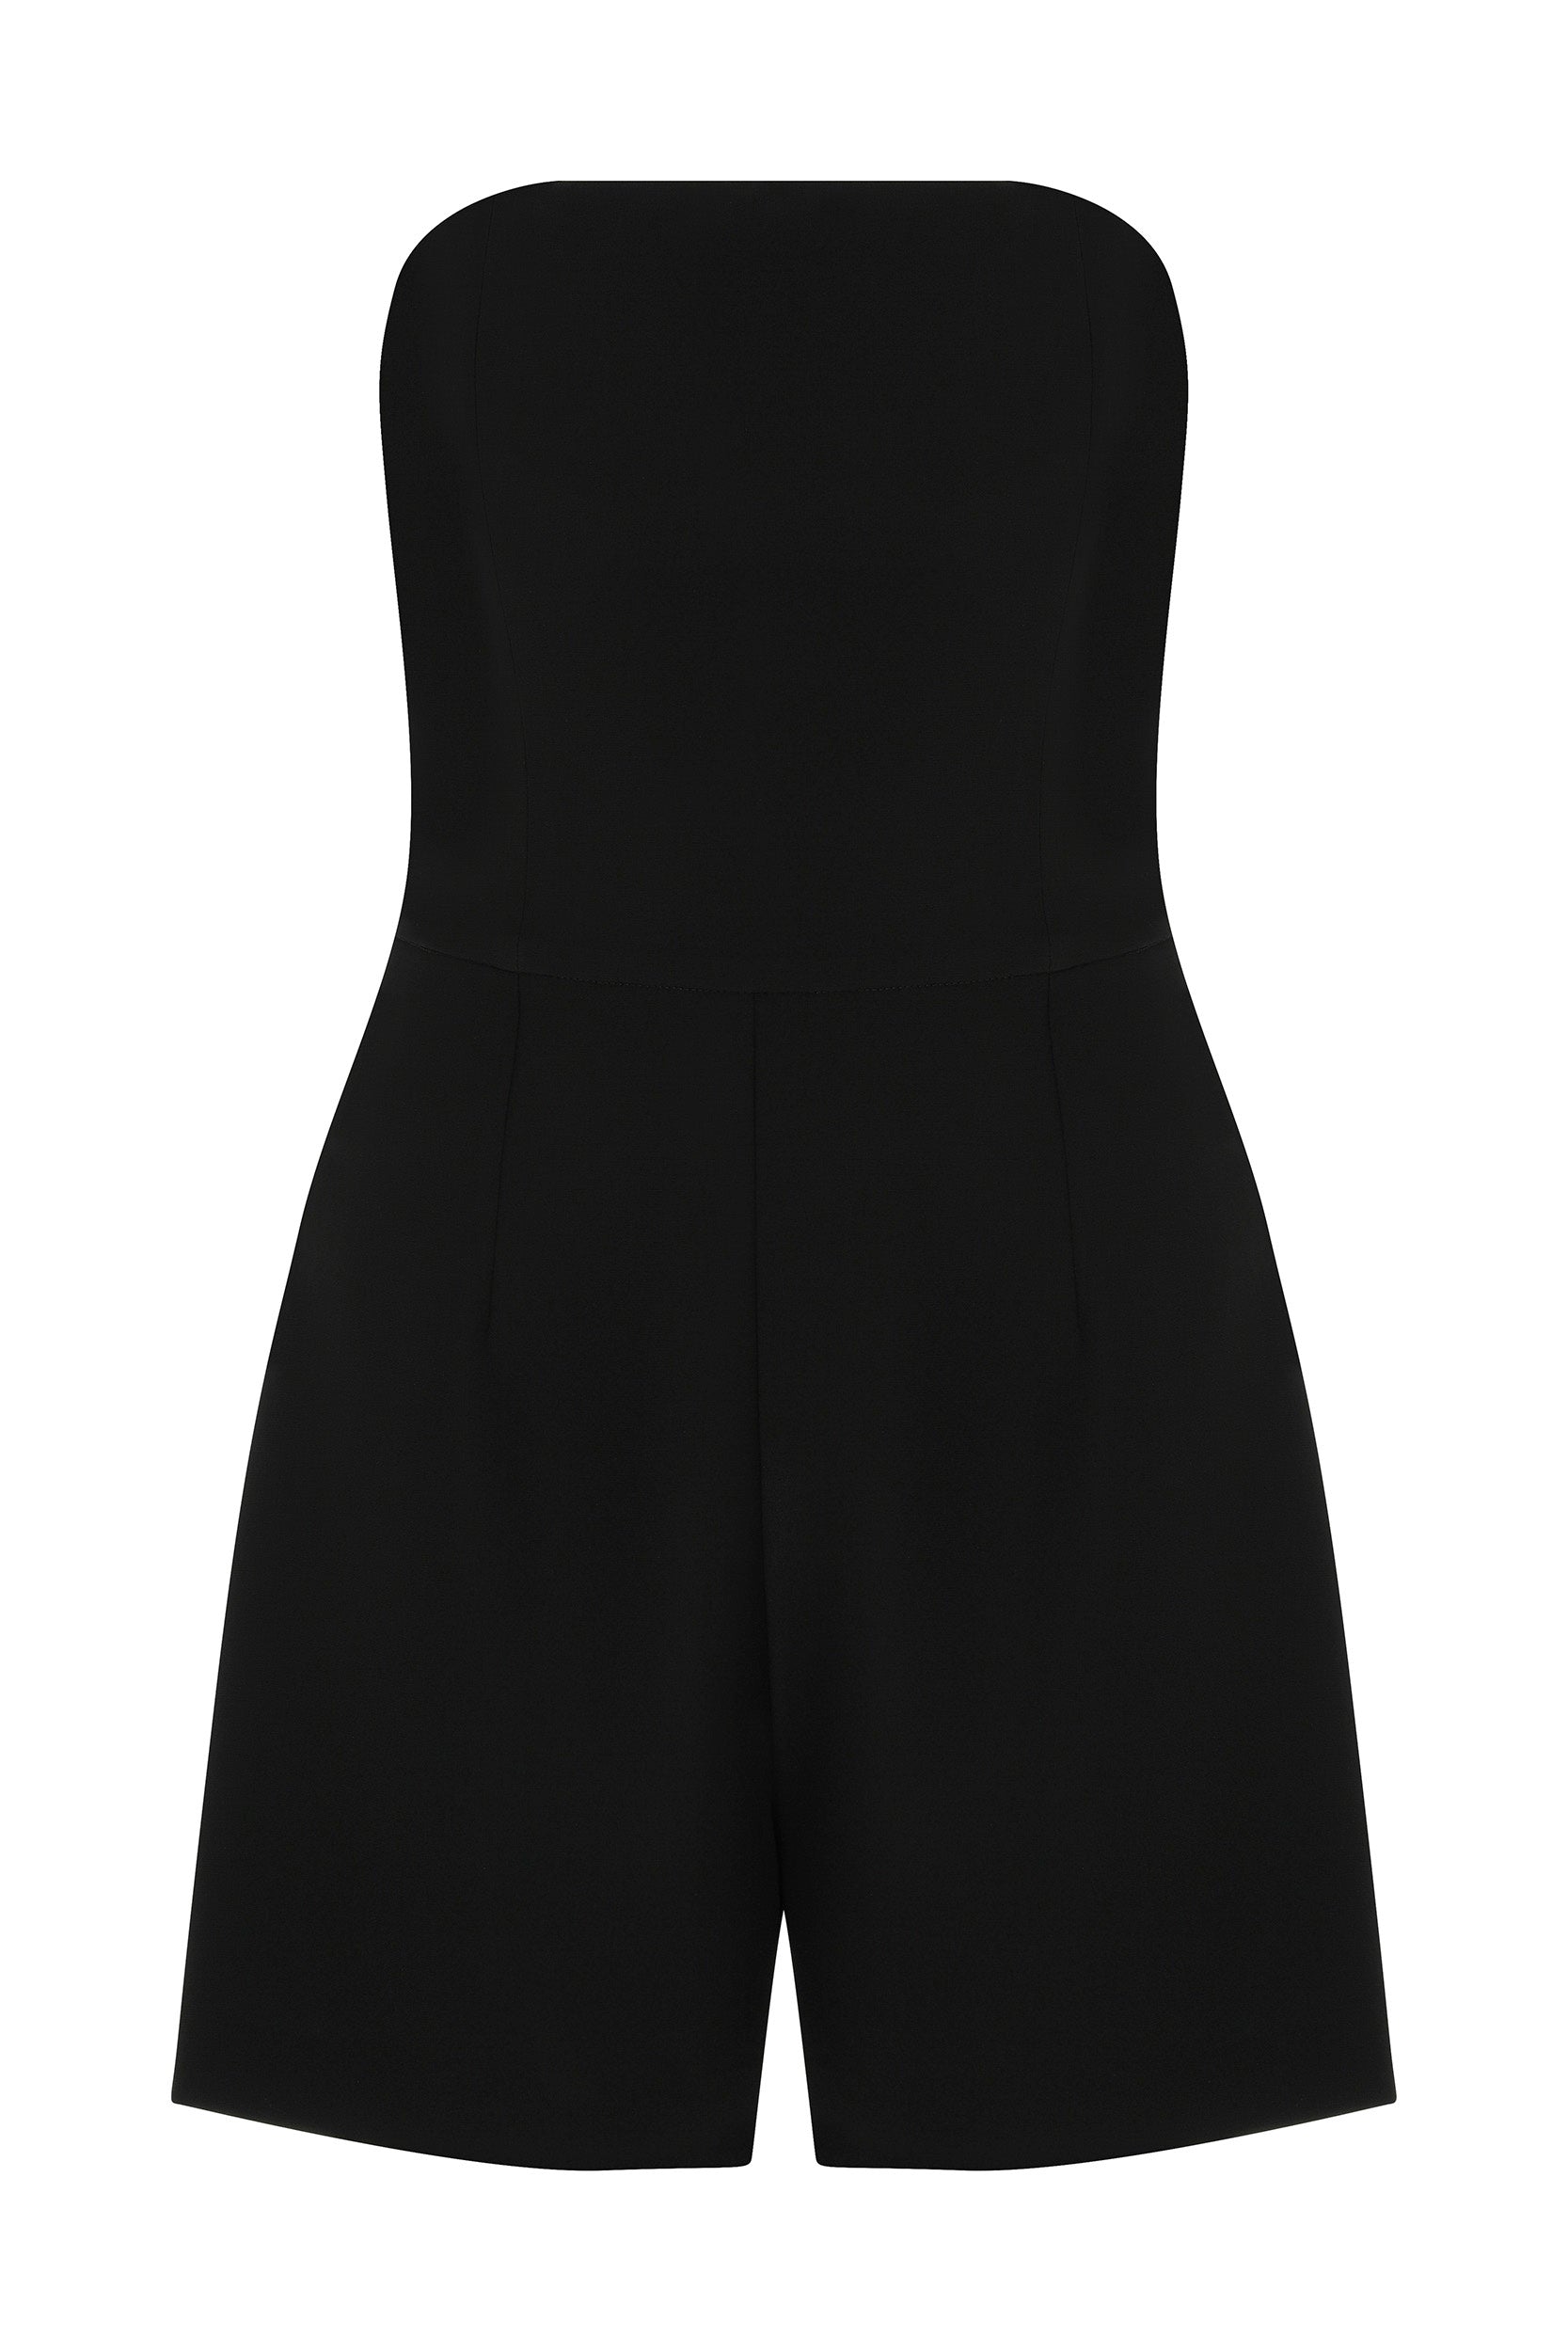 Roman Strapless Black Rompers - Conscious Product. 2